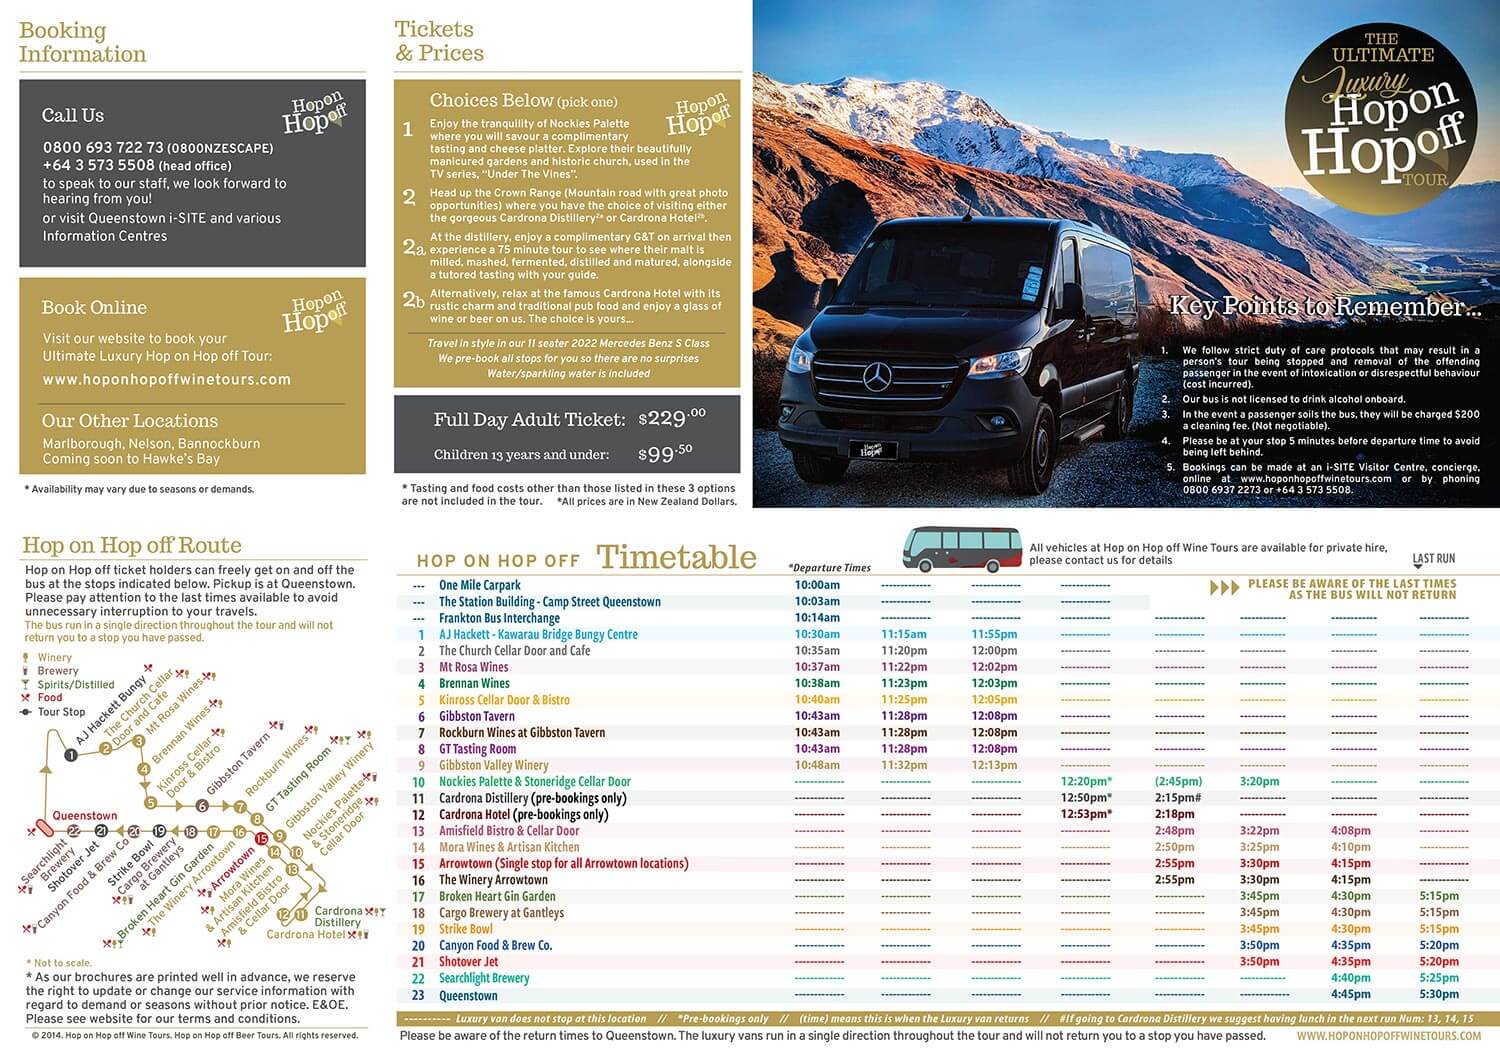 Queenstown Luxury Hop On Hop Off Tour Timetable